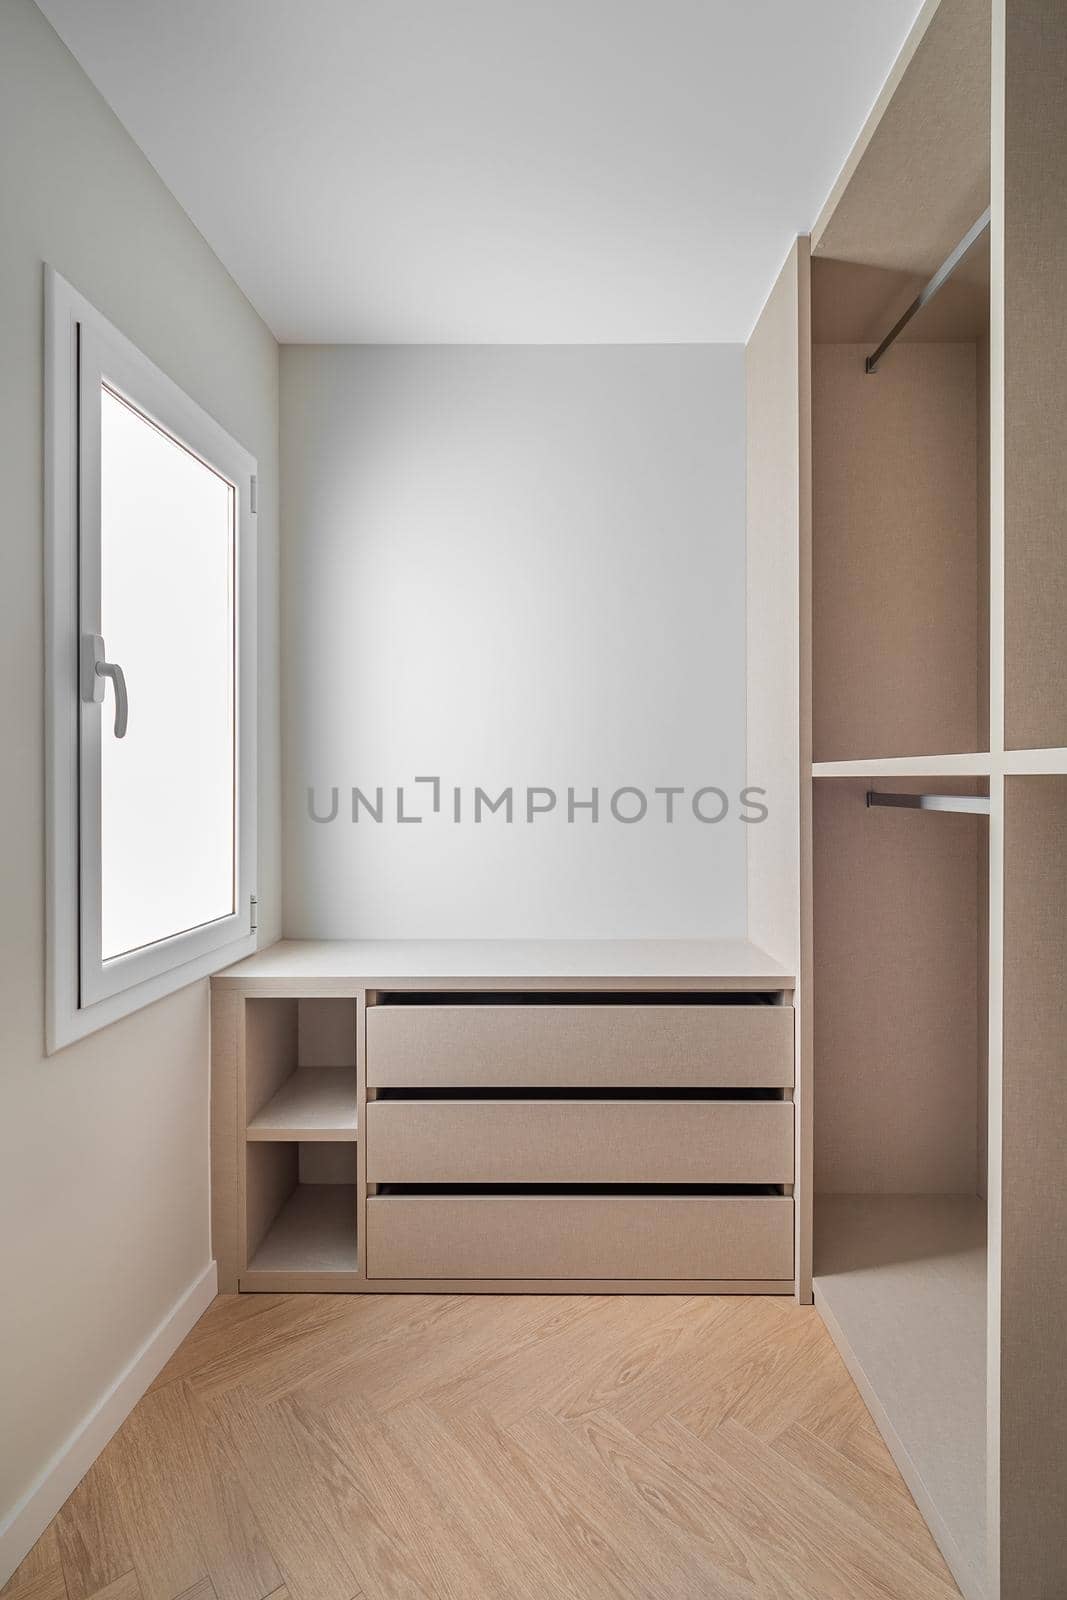 New built-in furniture in a small dressing room. Modern and empty storage room with wardrobe, drawers and plenty of space for hangers. by apavlin